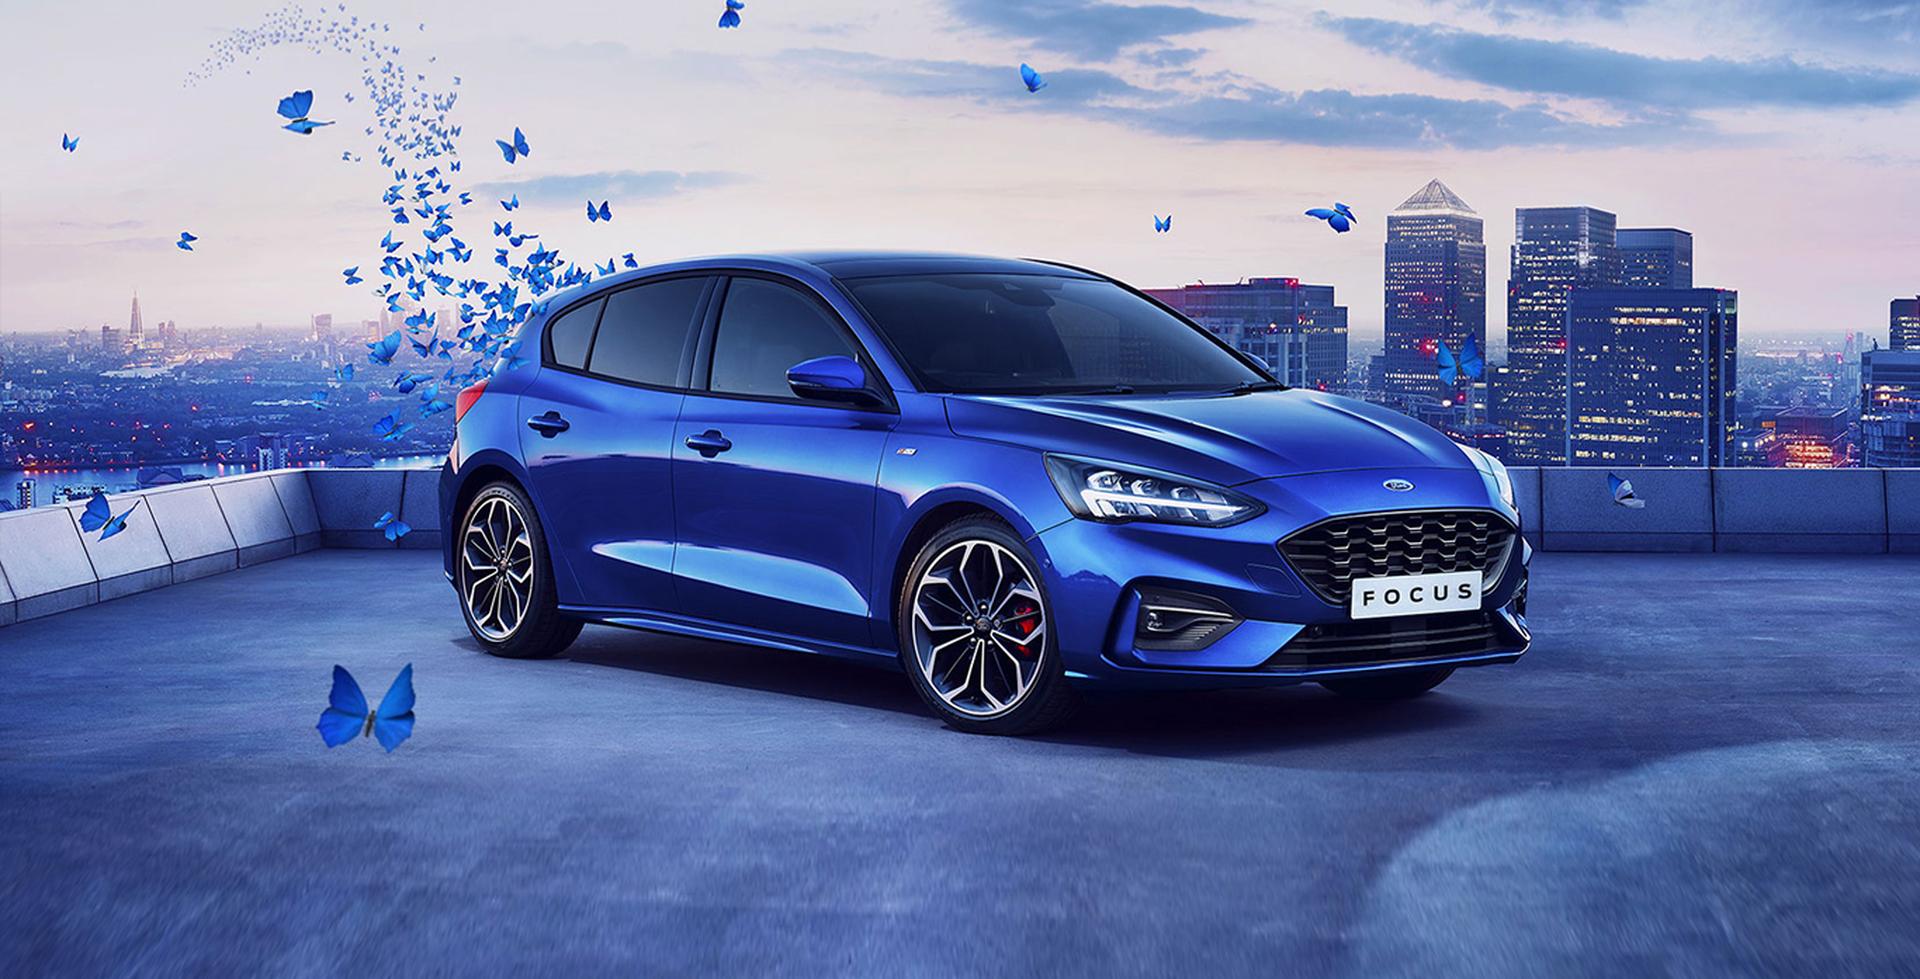 Ford Focus Style image